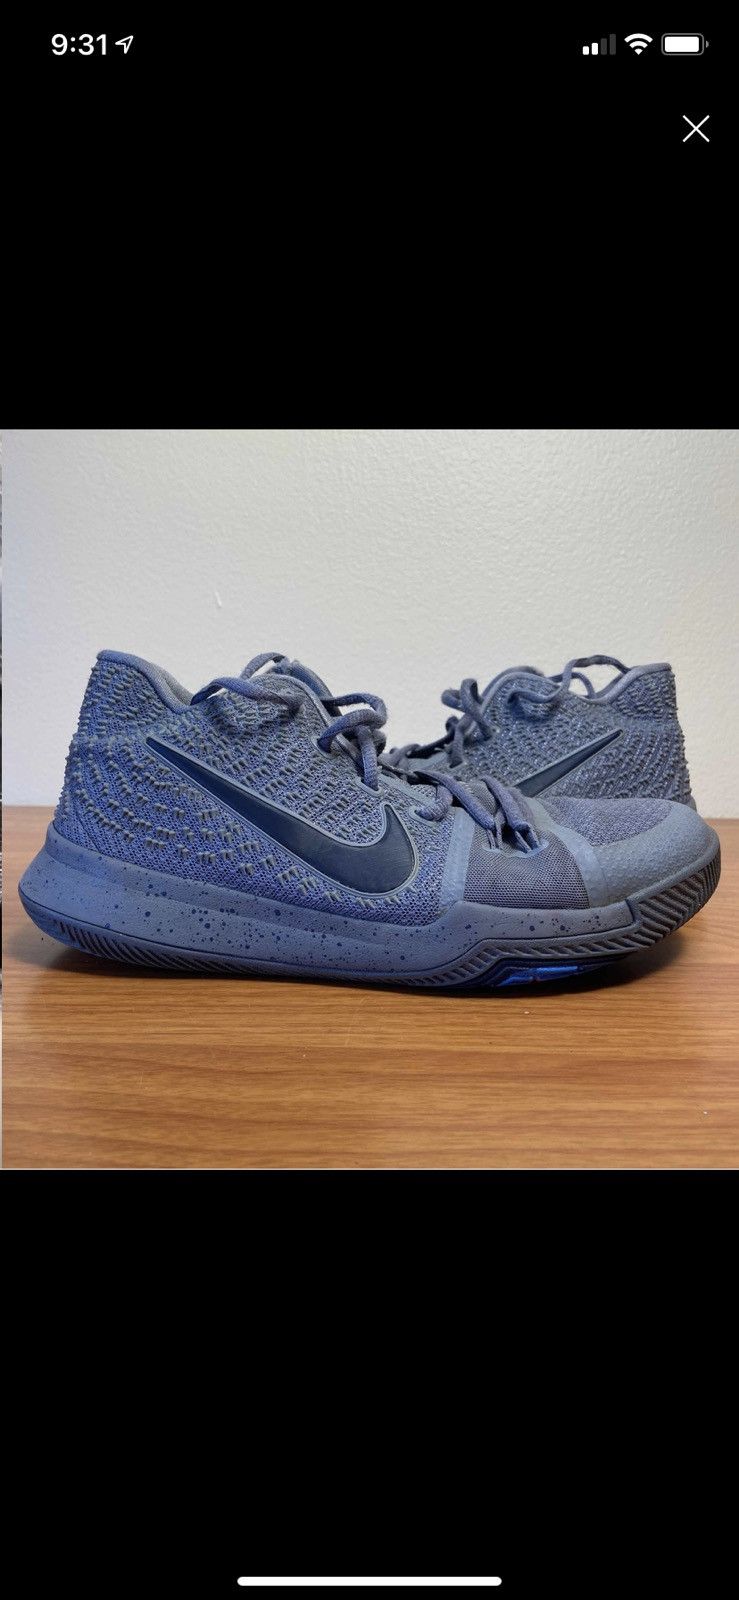 Nike Kyrie 3 Cool Grey Size US 6.5 / EU 39-40 - 1 Preview